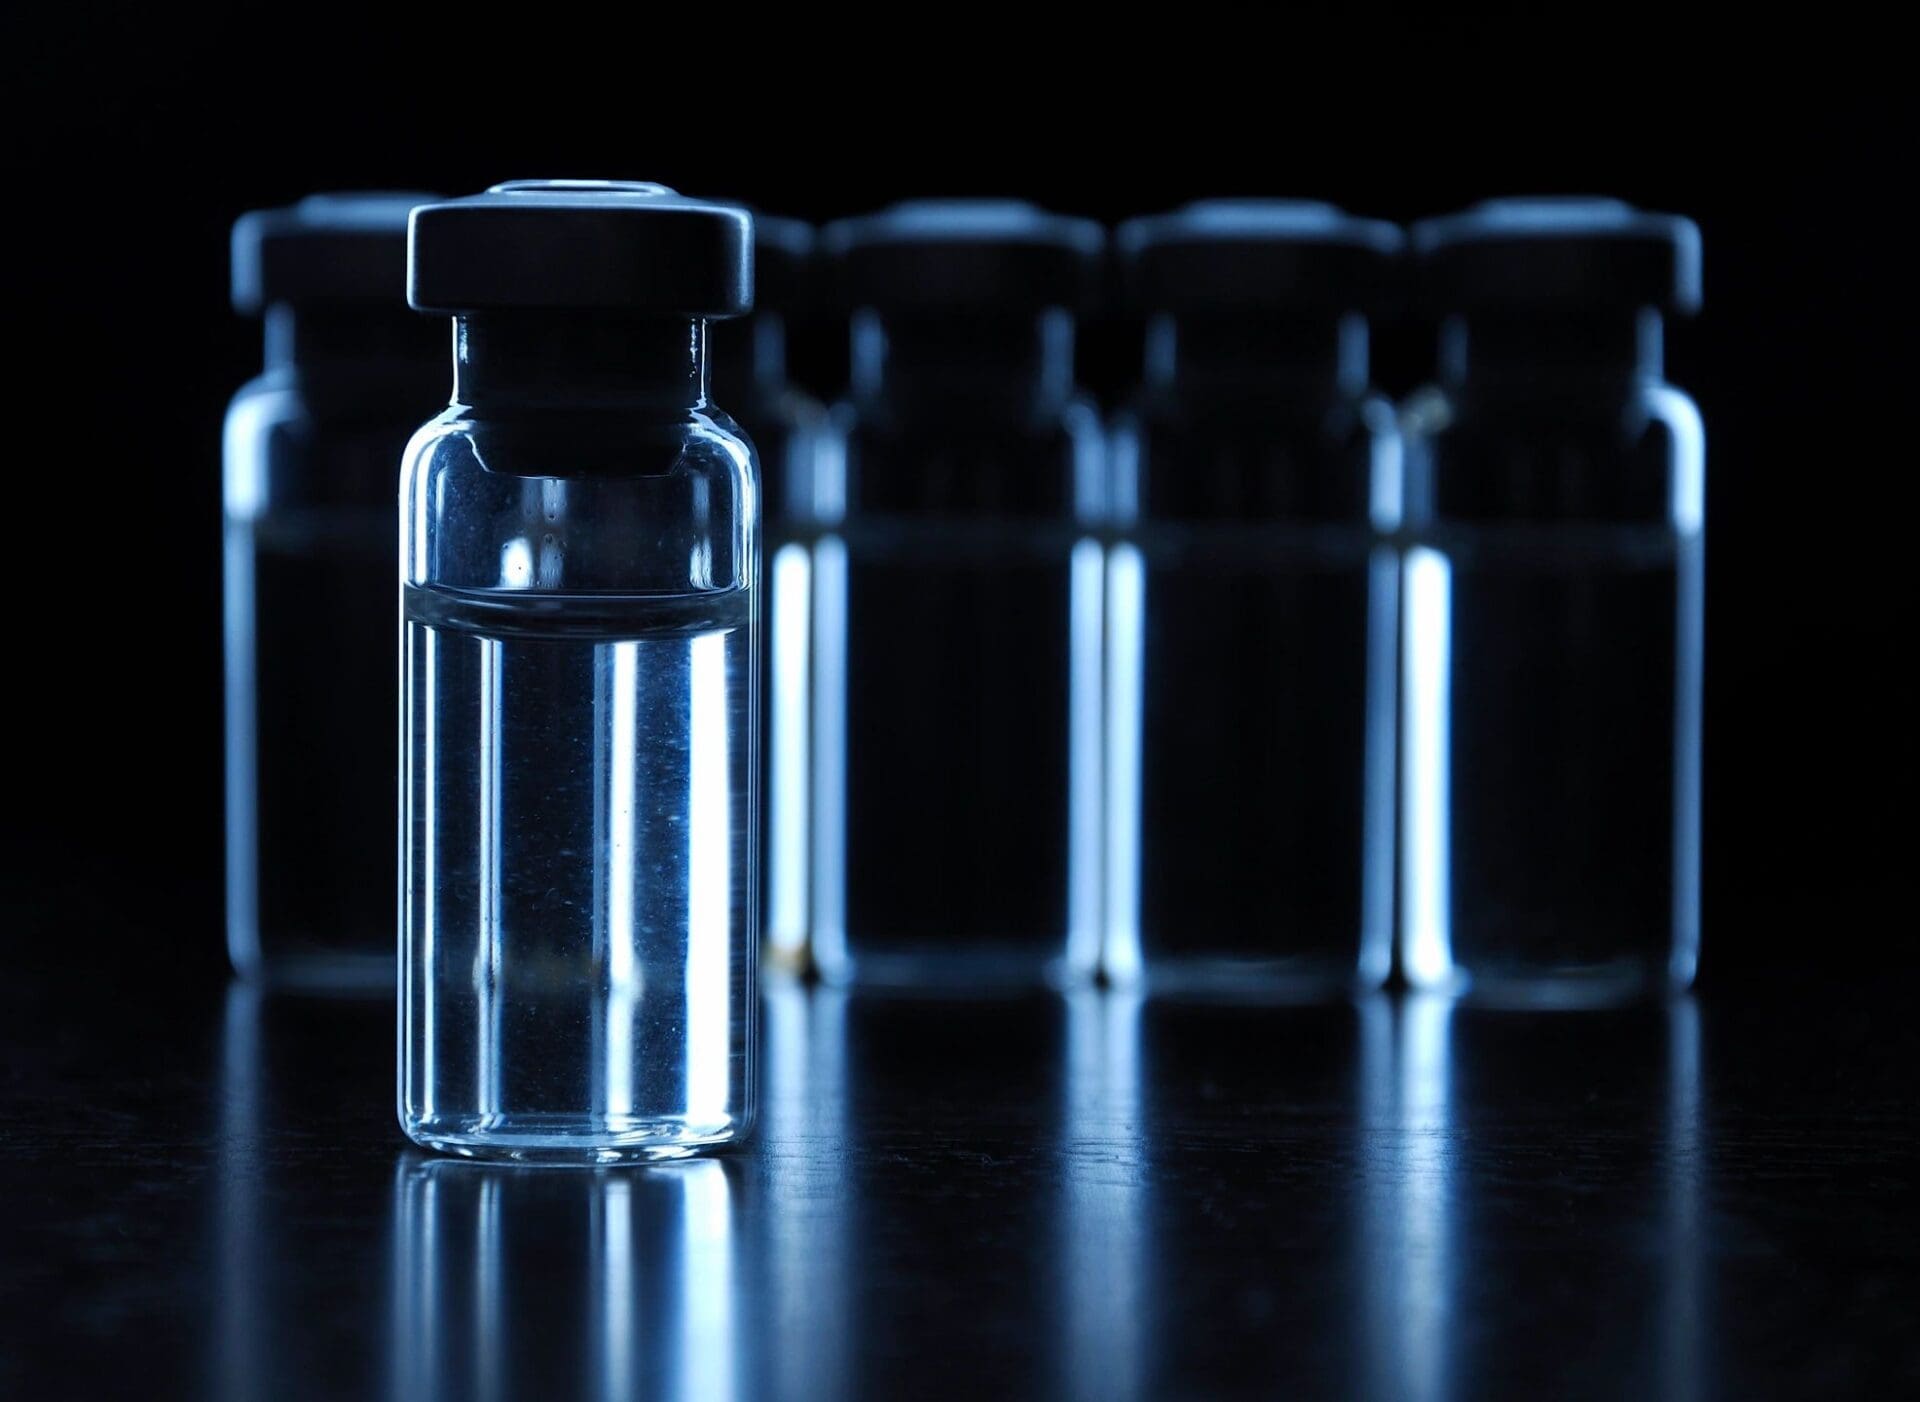 A group of glass vials on a dark surface.